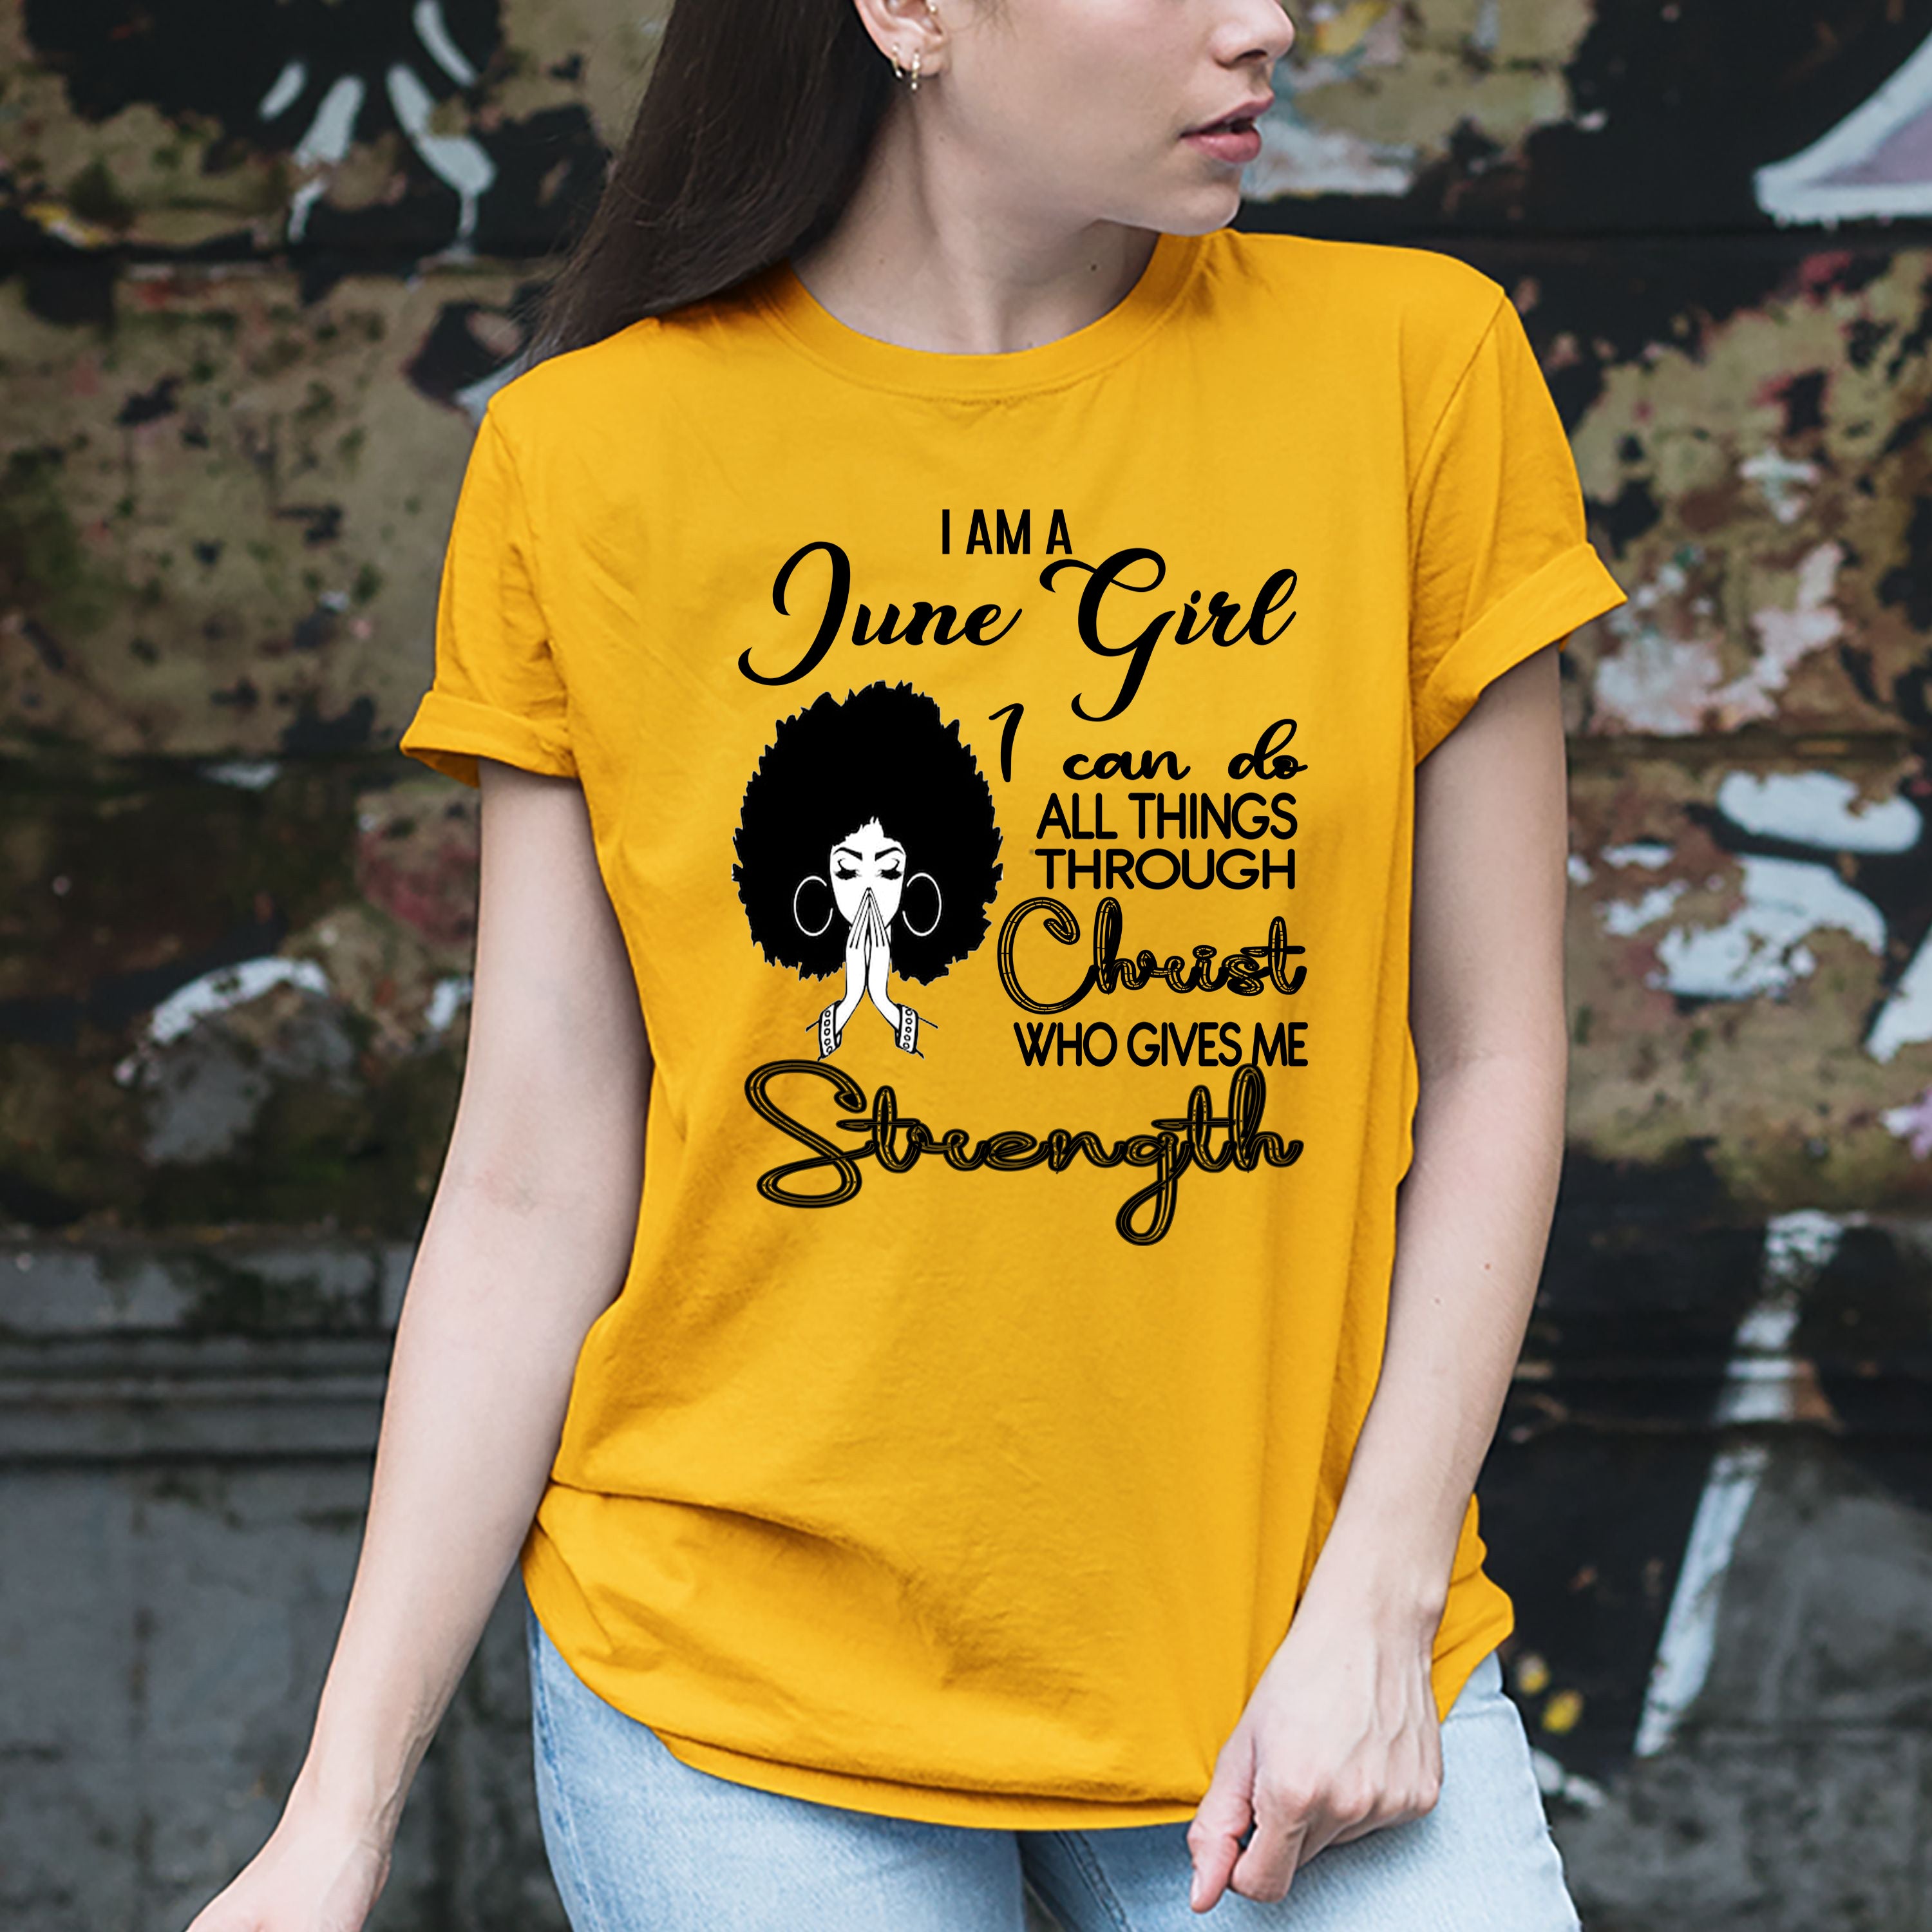 "JUNE GIRL Can Do All Things Through Christ Who Gives Me Strength",T-Shirt.